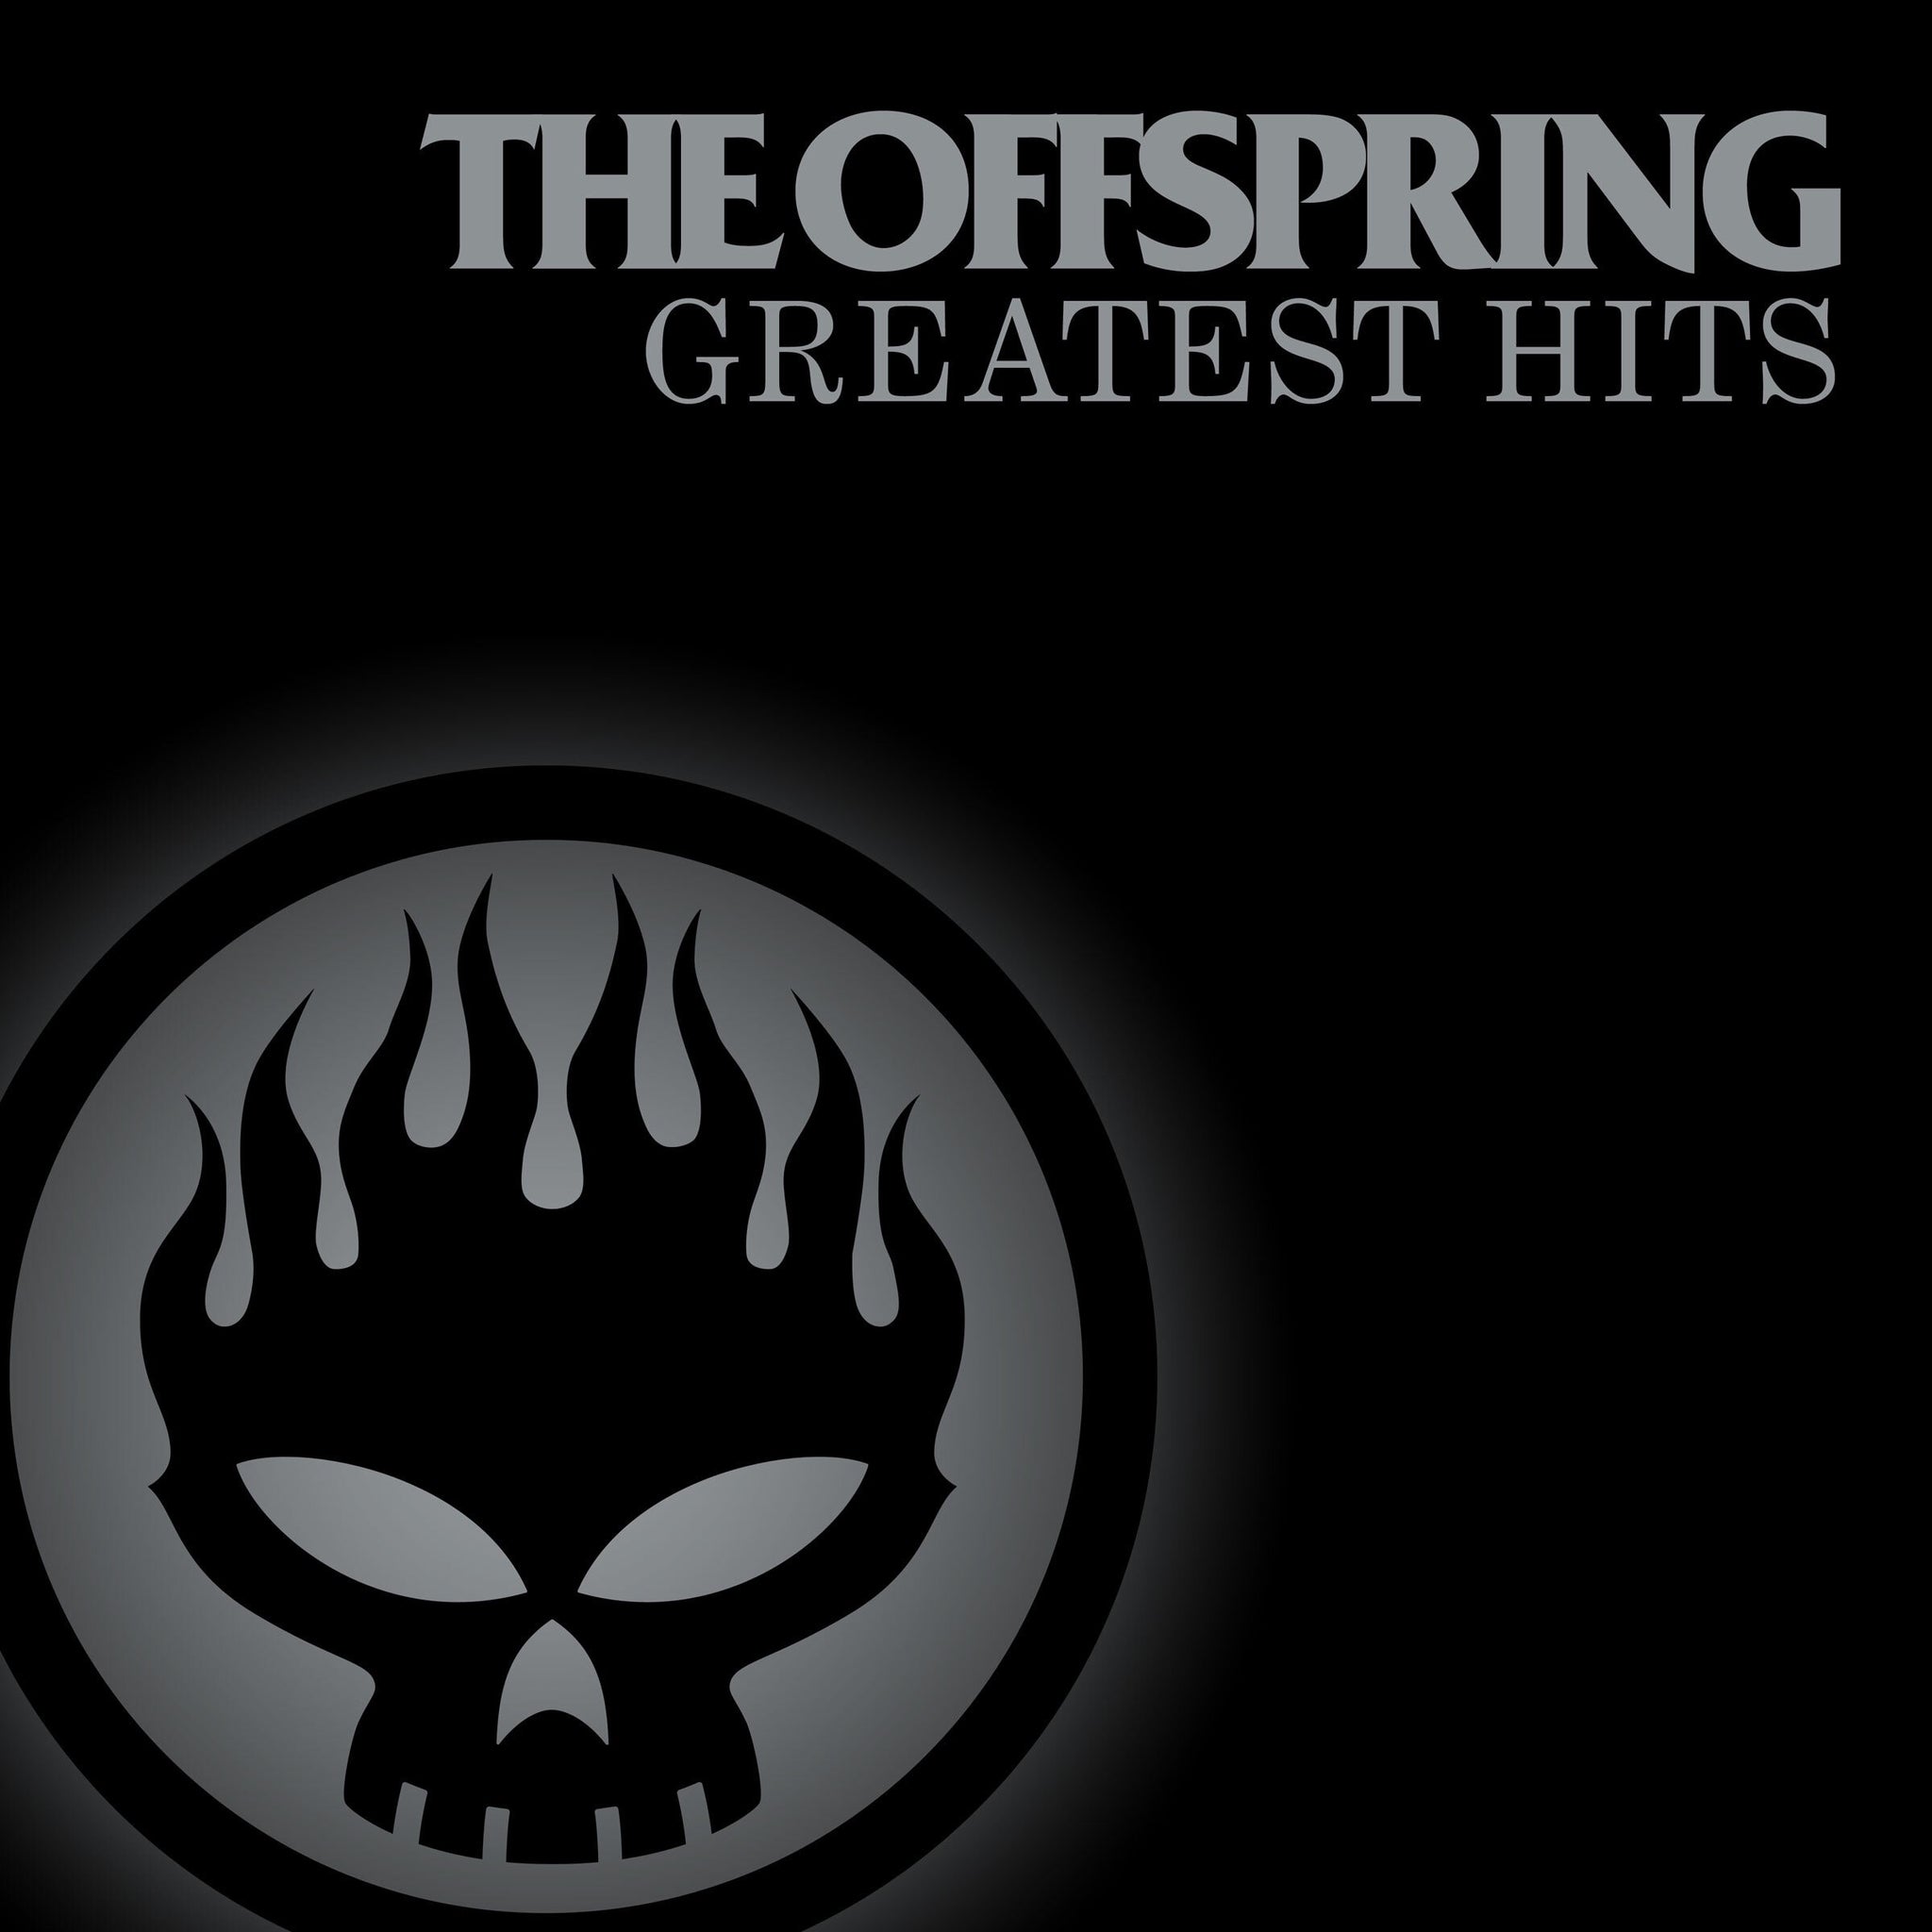 The Offspring Greatest Hits COLOURED VINYL LP (RSD22)